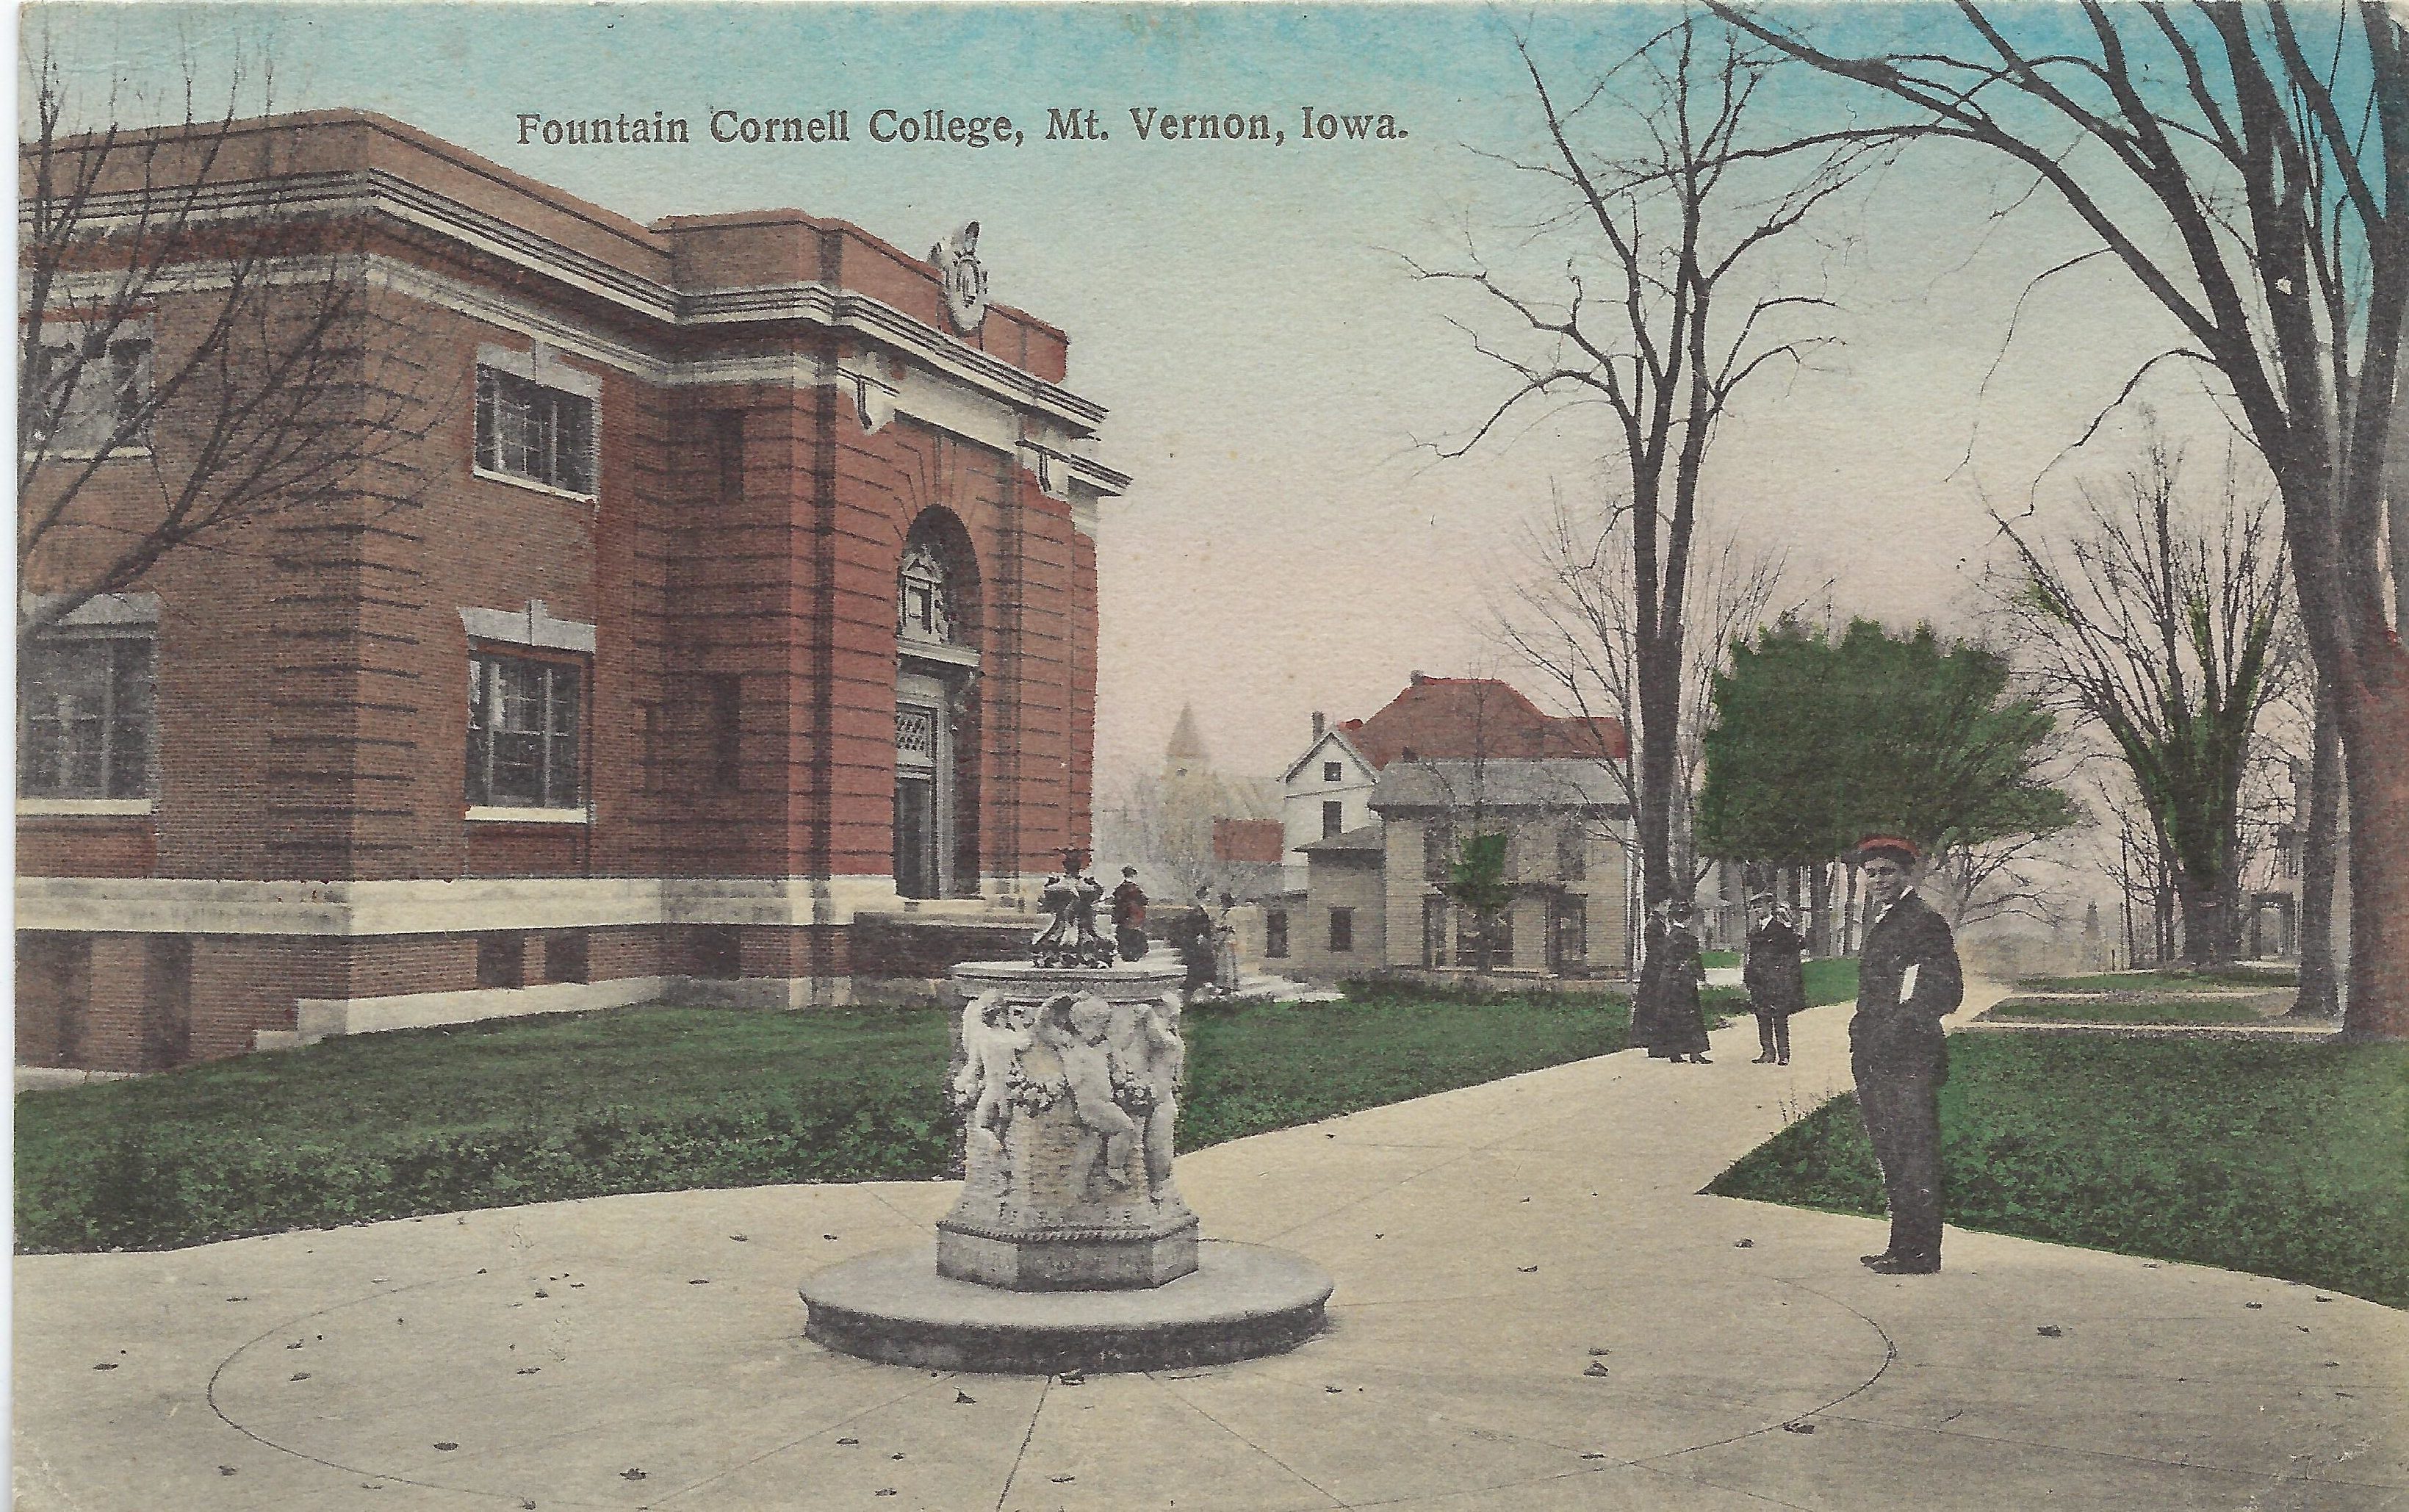 Photo of Fountain on the Cornell College campus